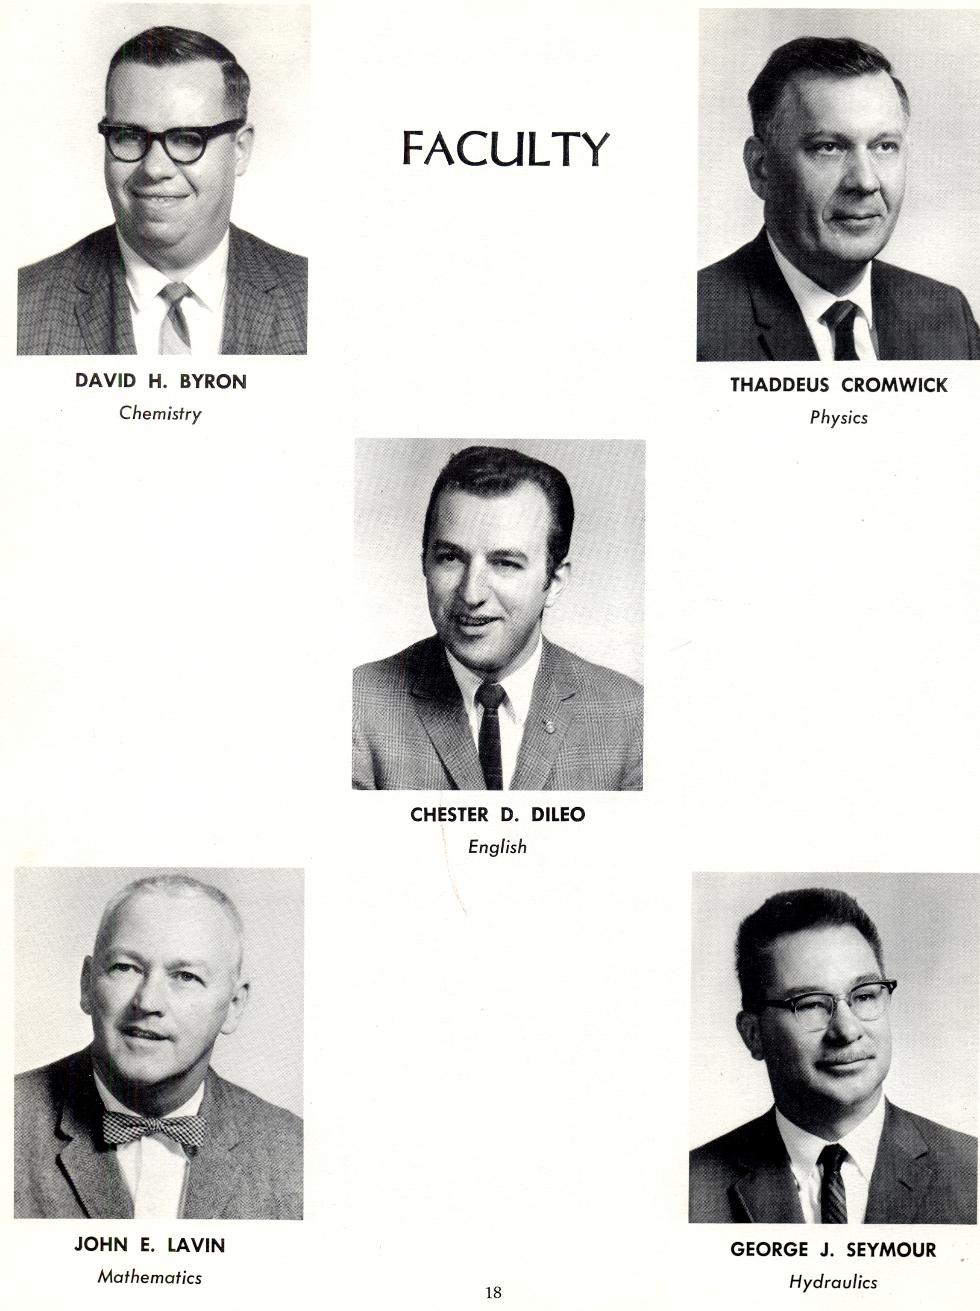 Worcester Industrial Technical Institute - Class of 1969 Yearbook Faculty